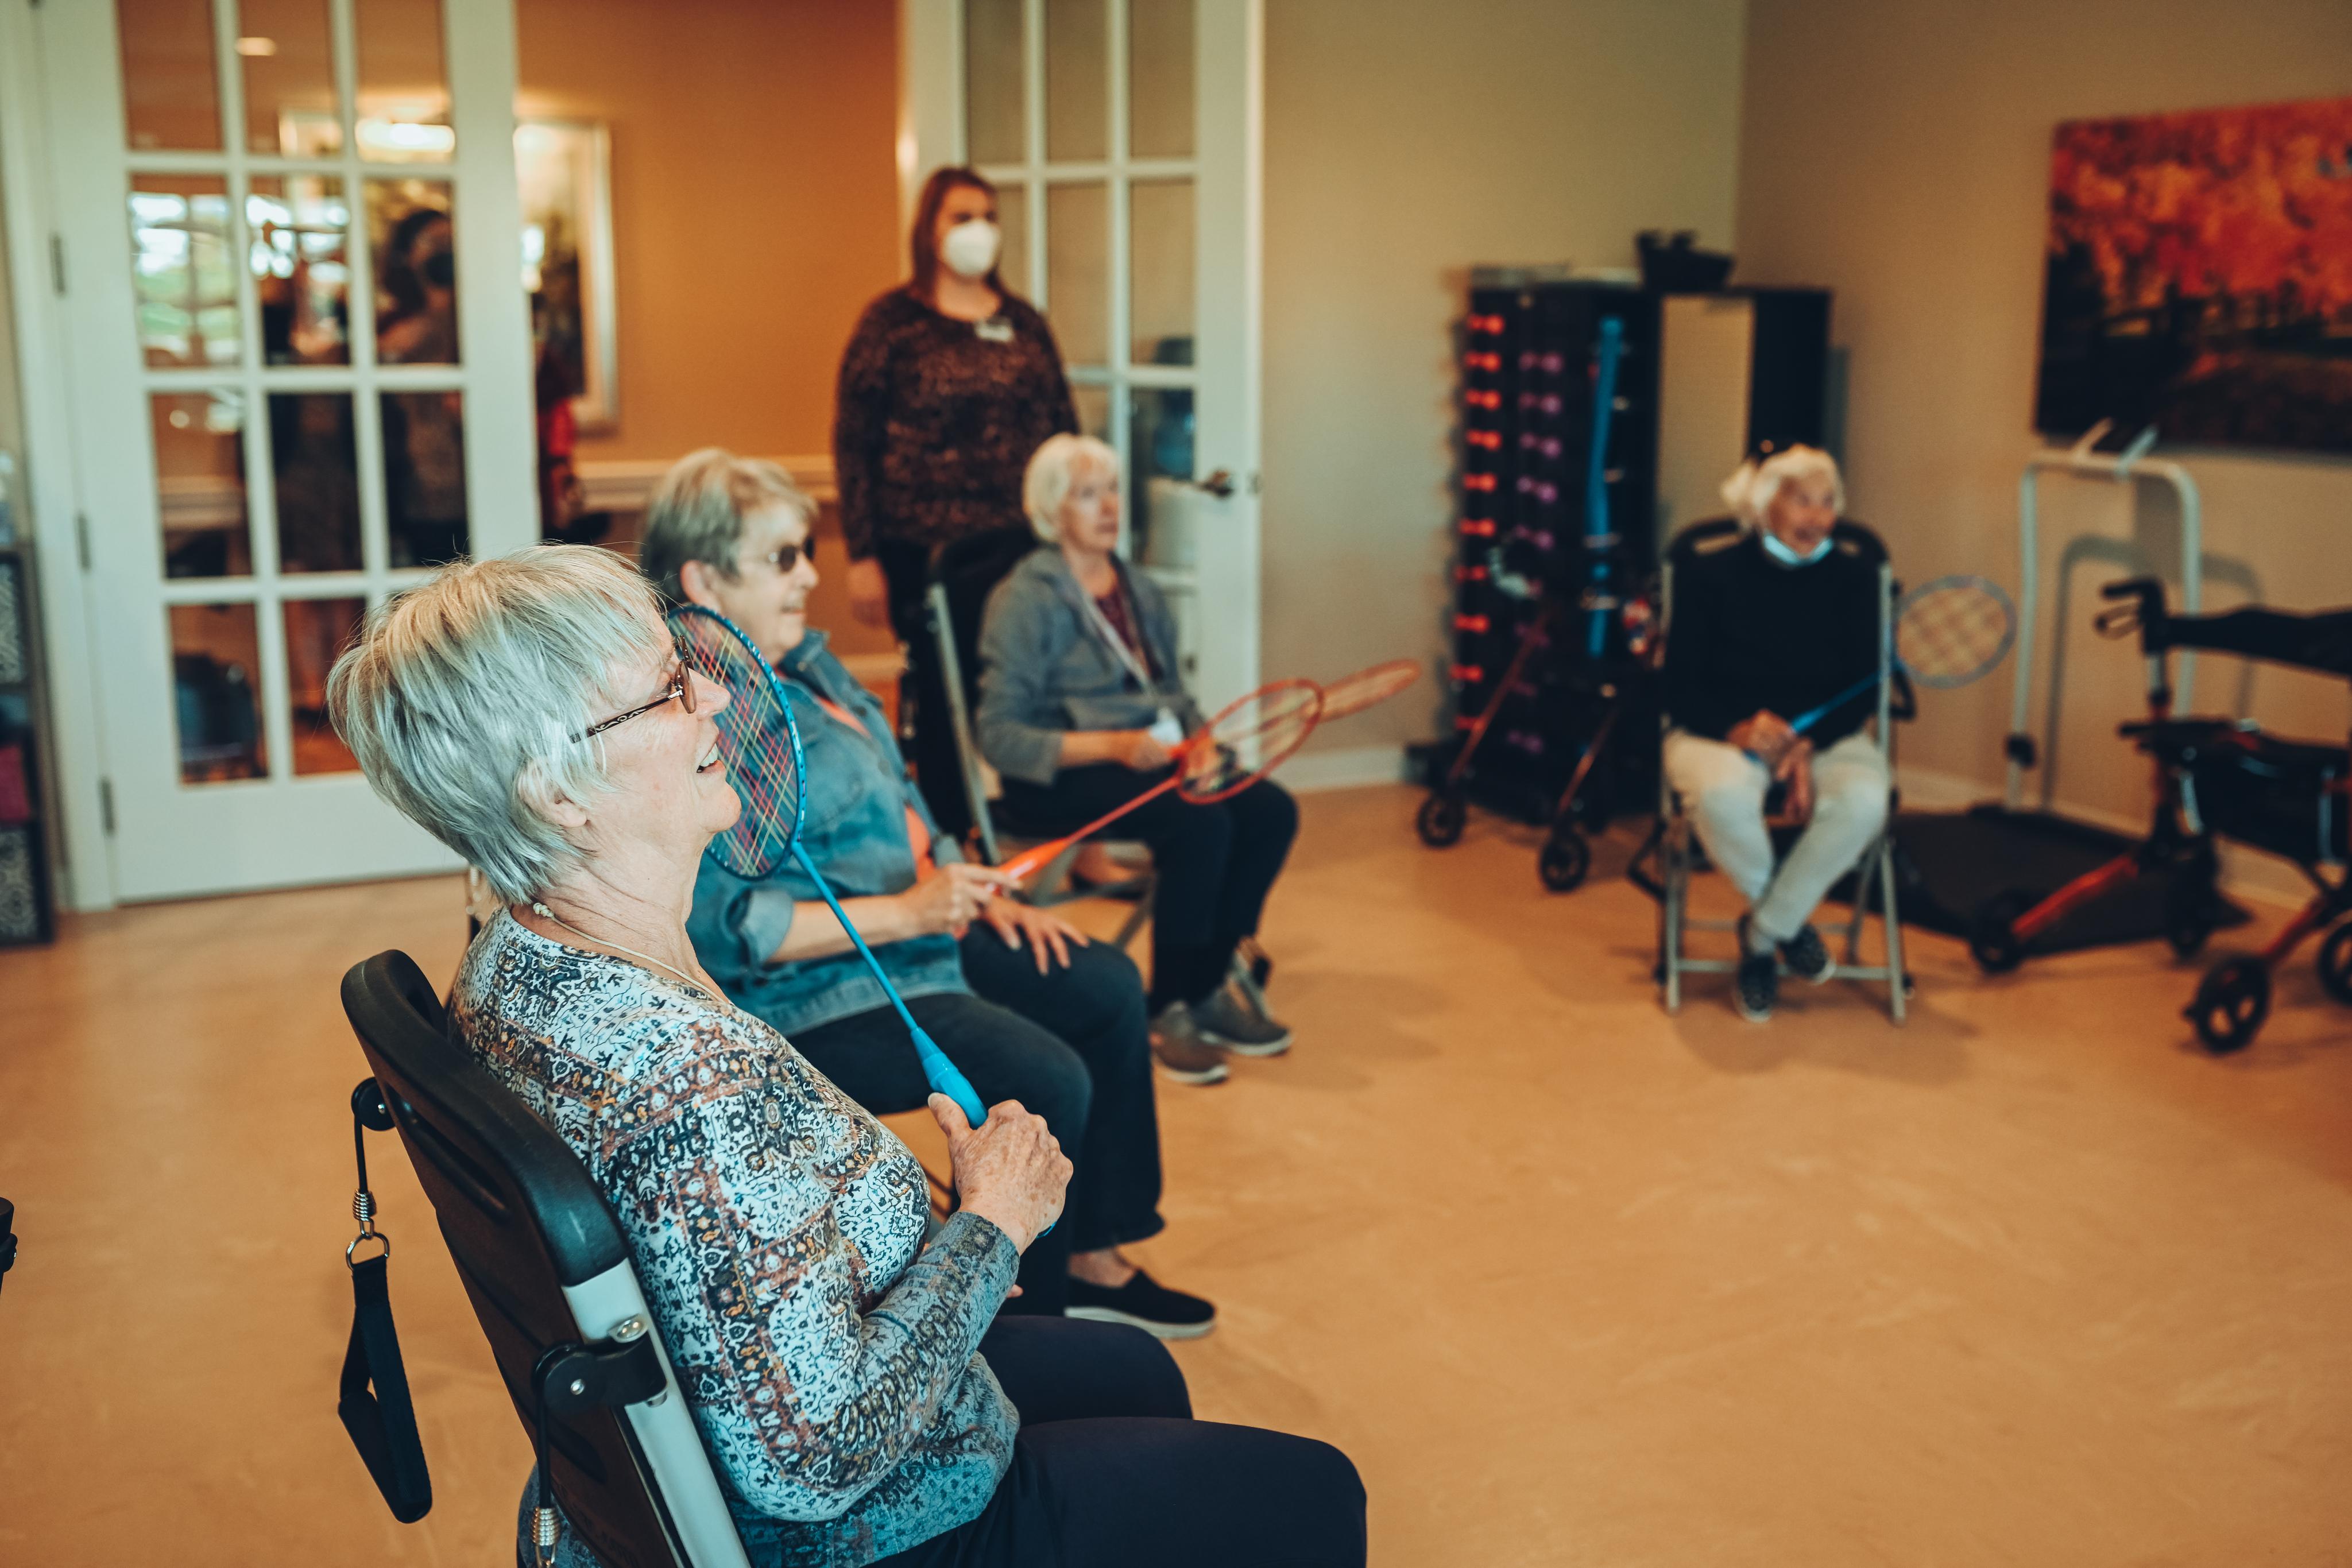 People participating in a seated group exercise class with rackets and a fitness instructor